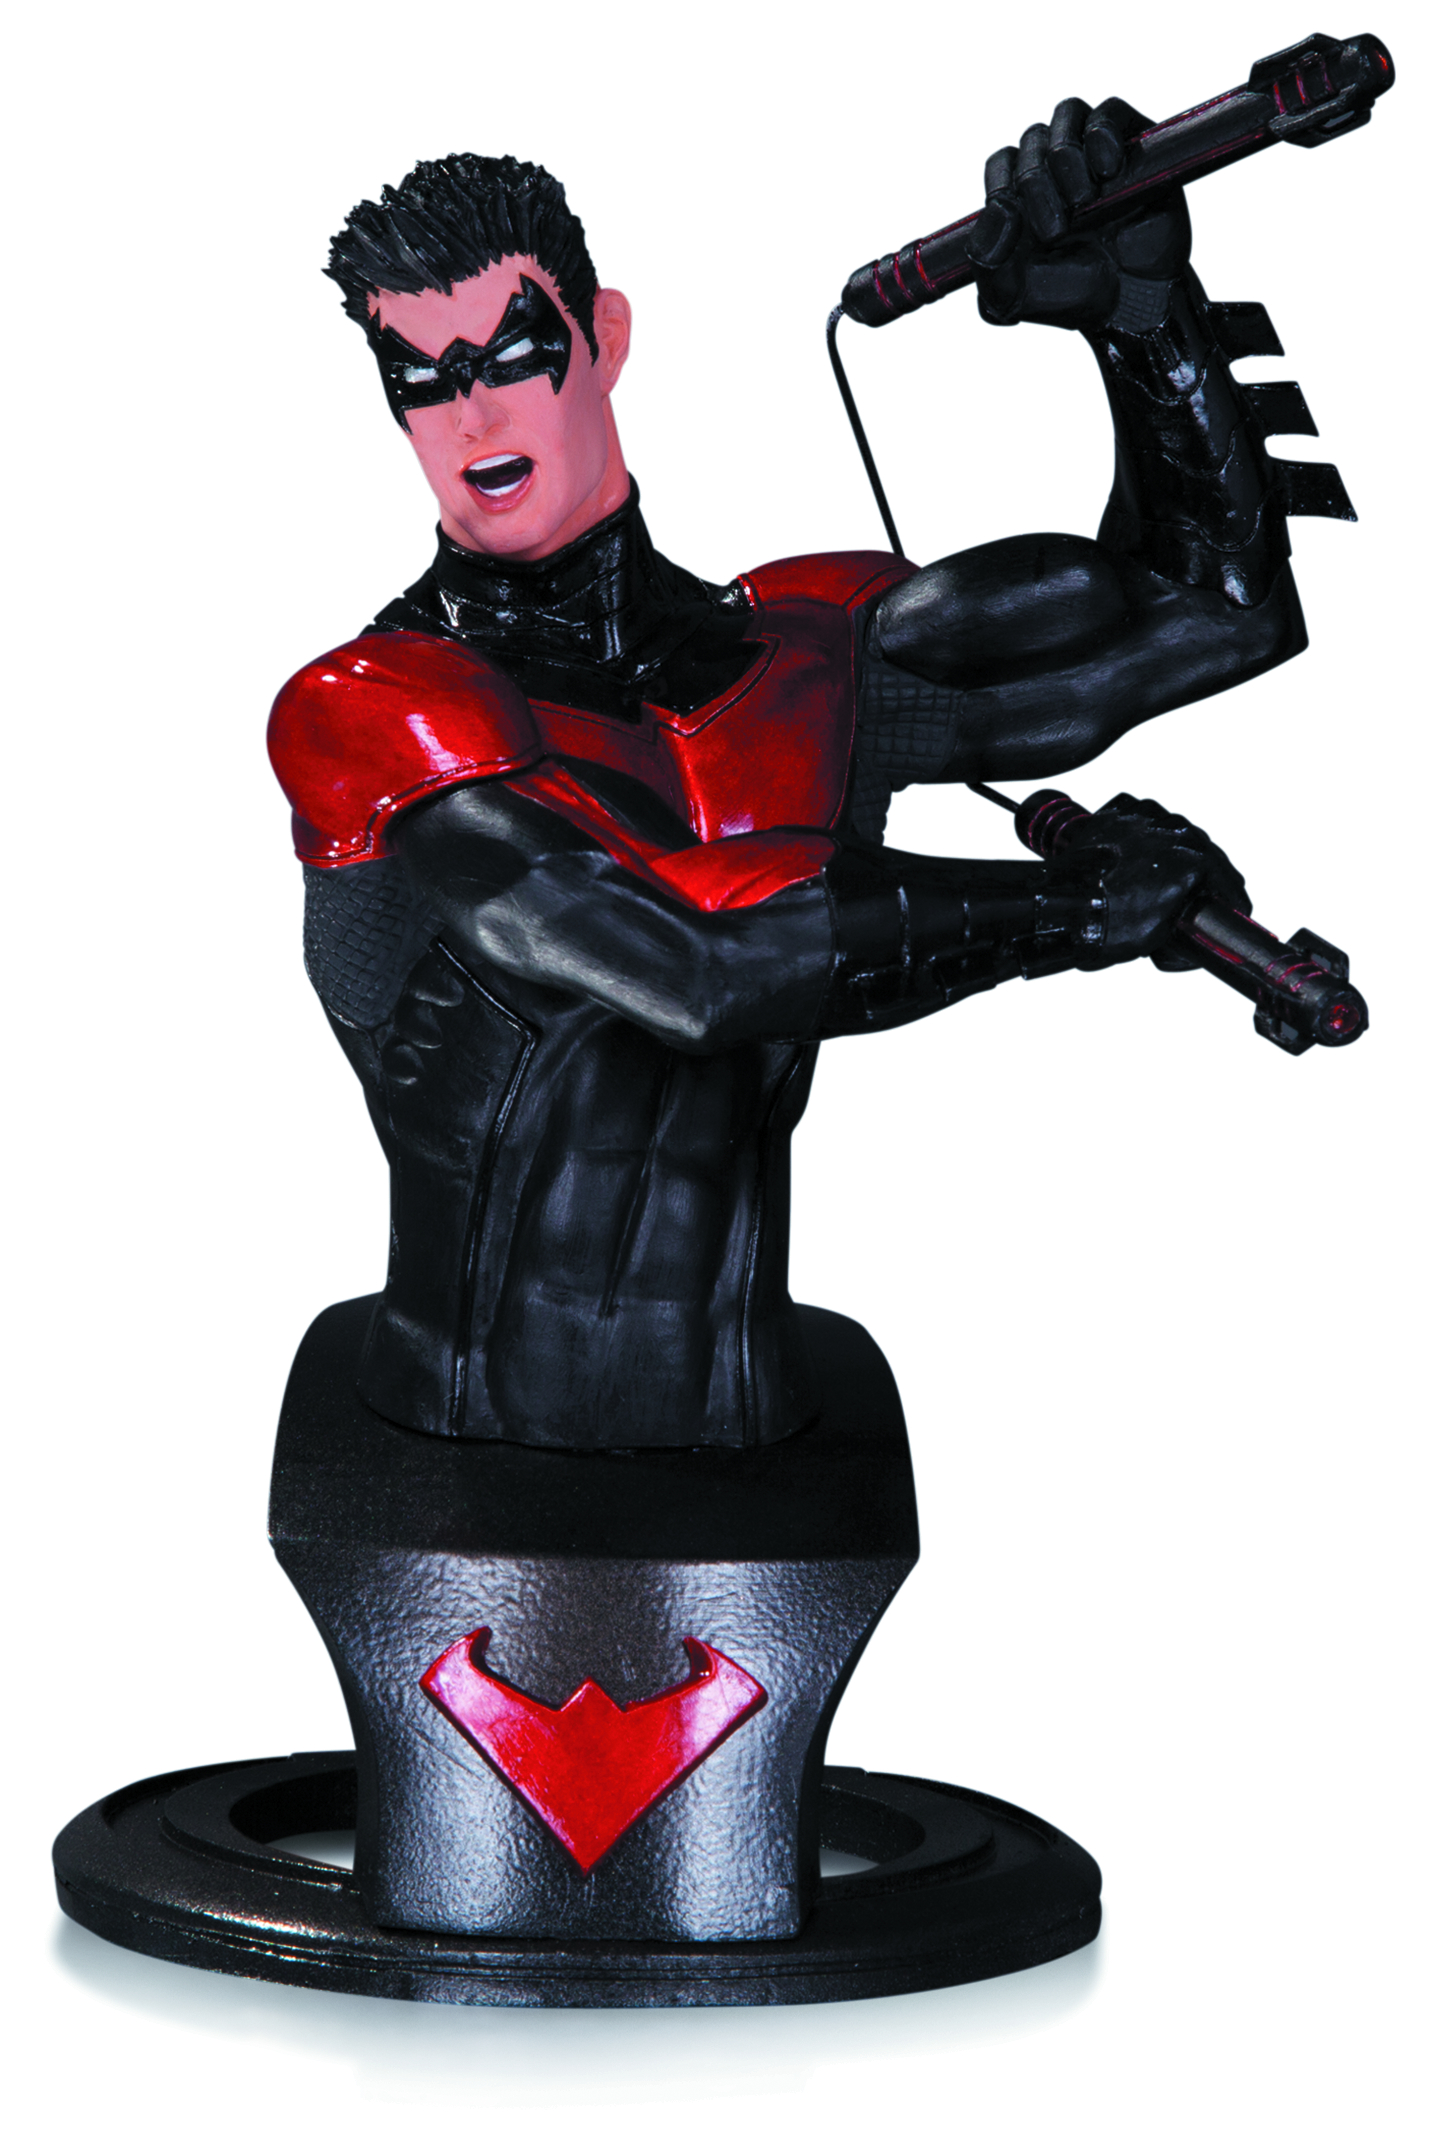 DC Comics: Super Heroes Nightwing Bust